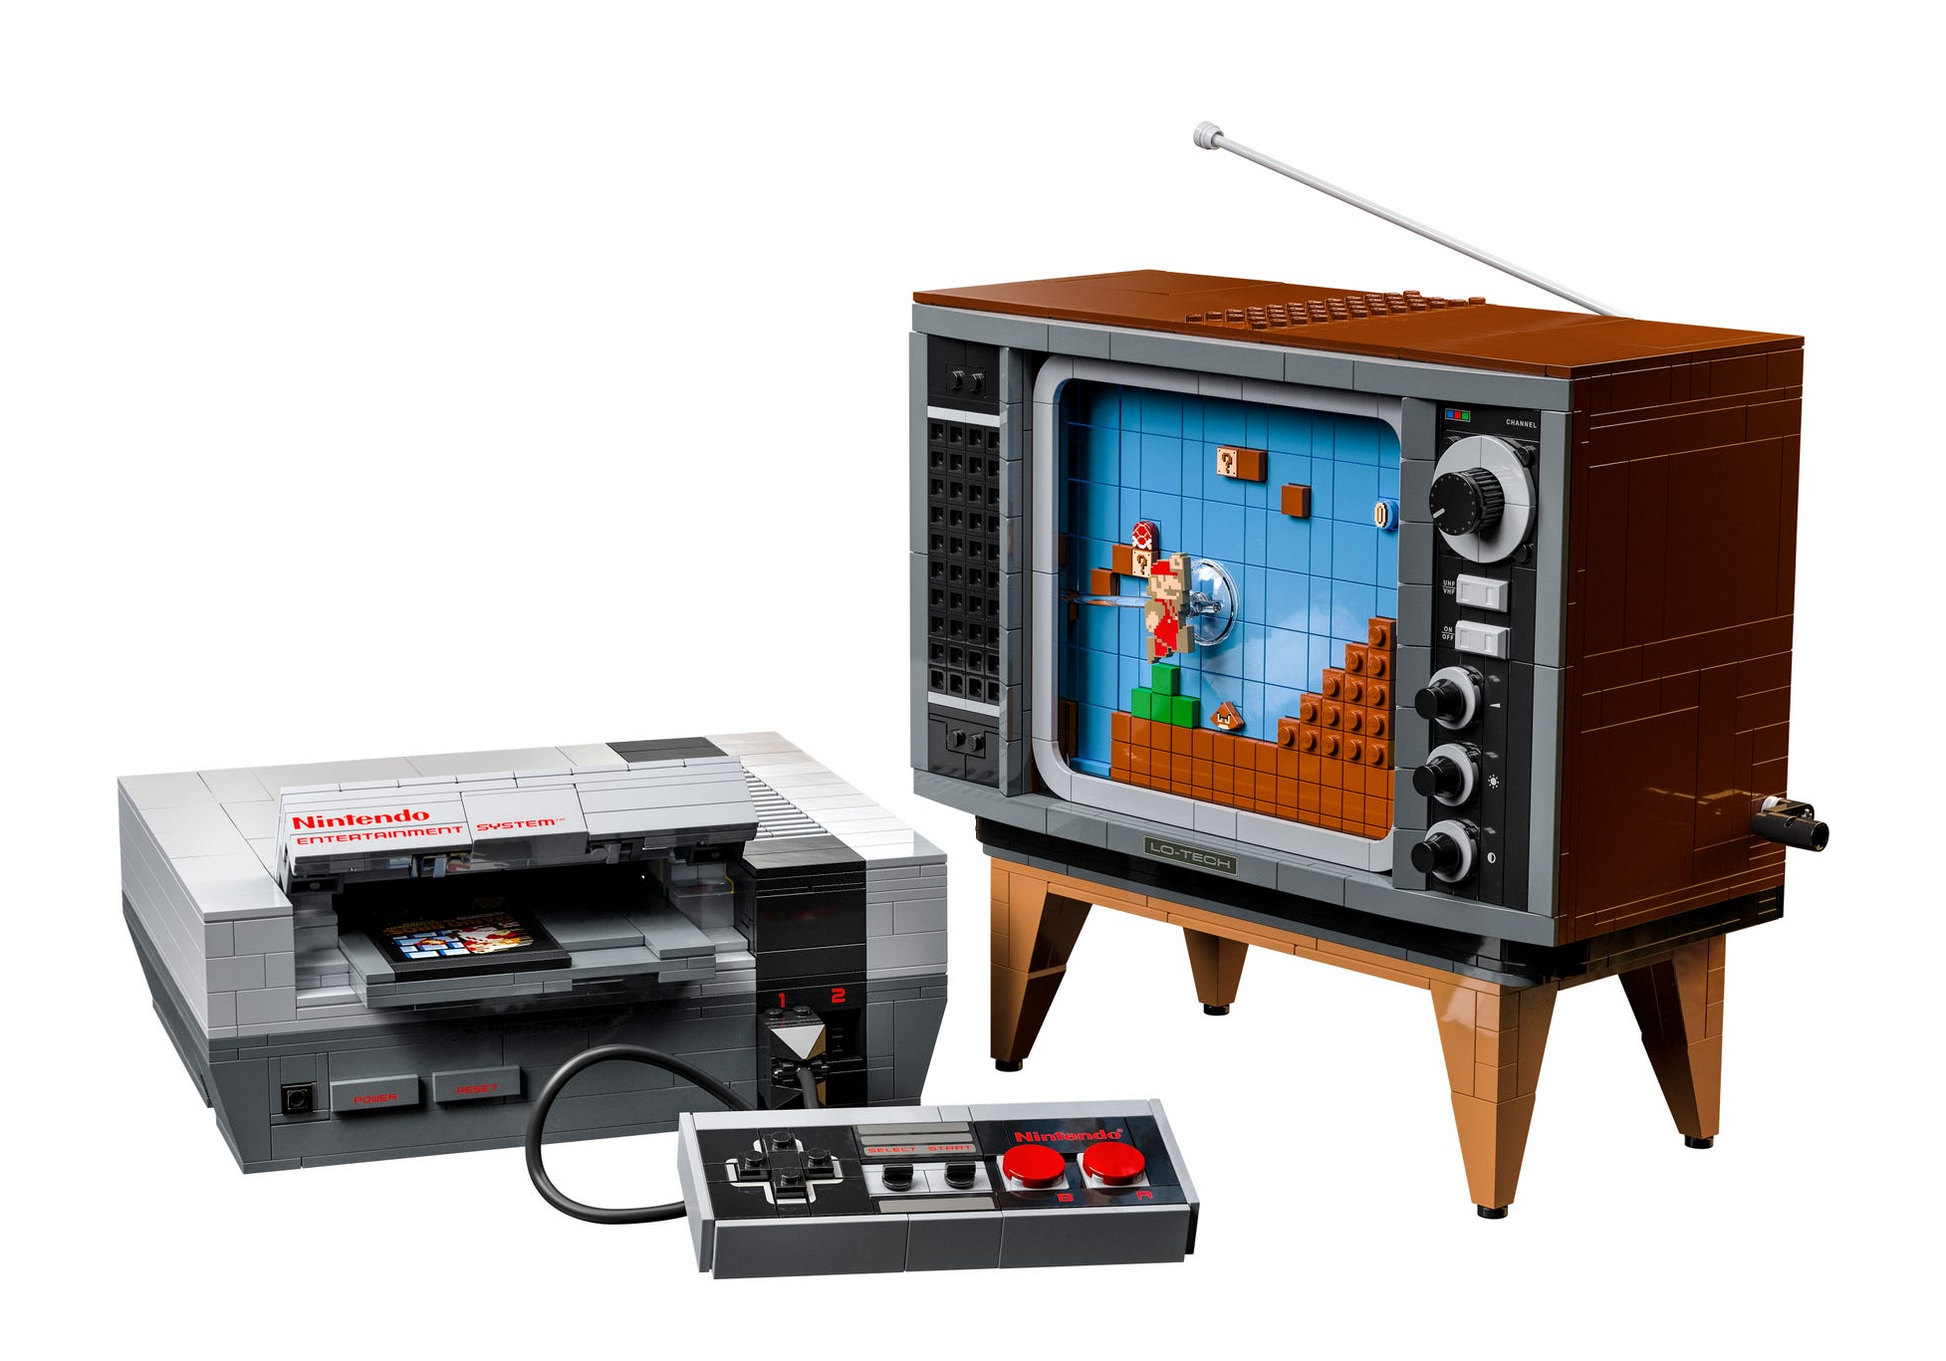 Lego Nintendo Entertainment System - Heroes Cave